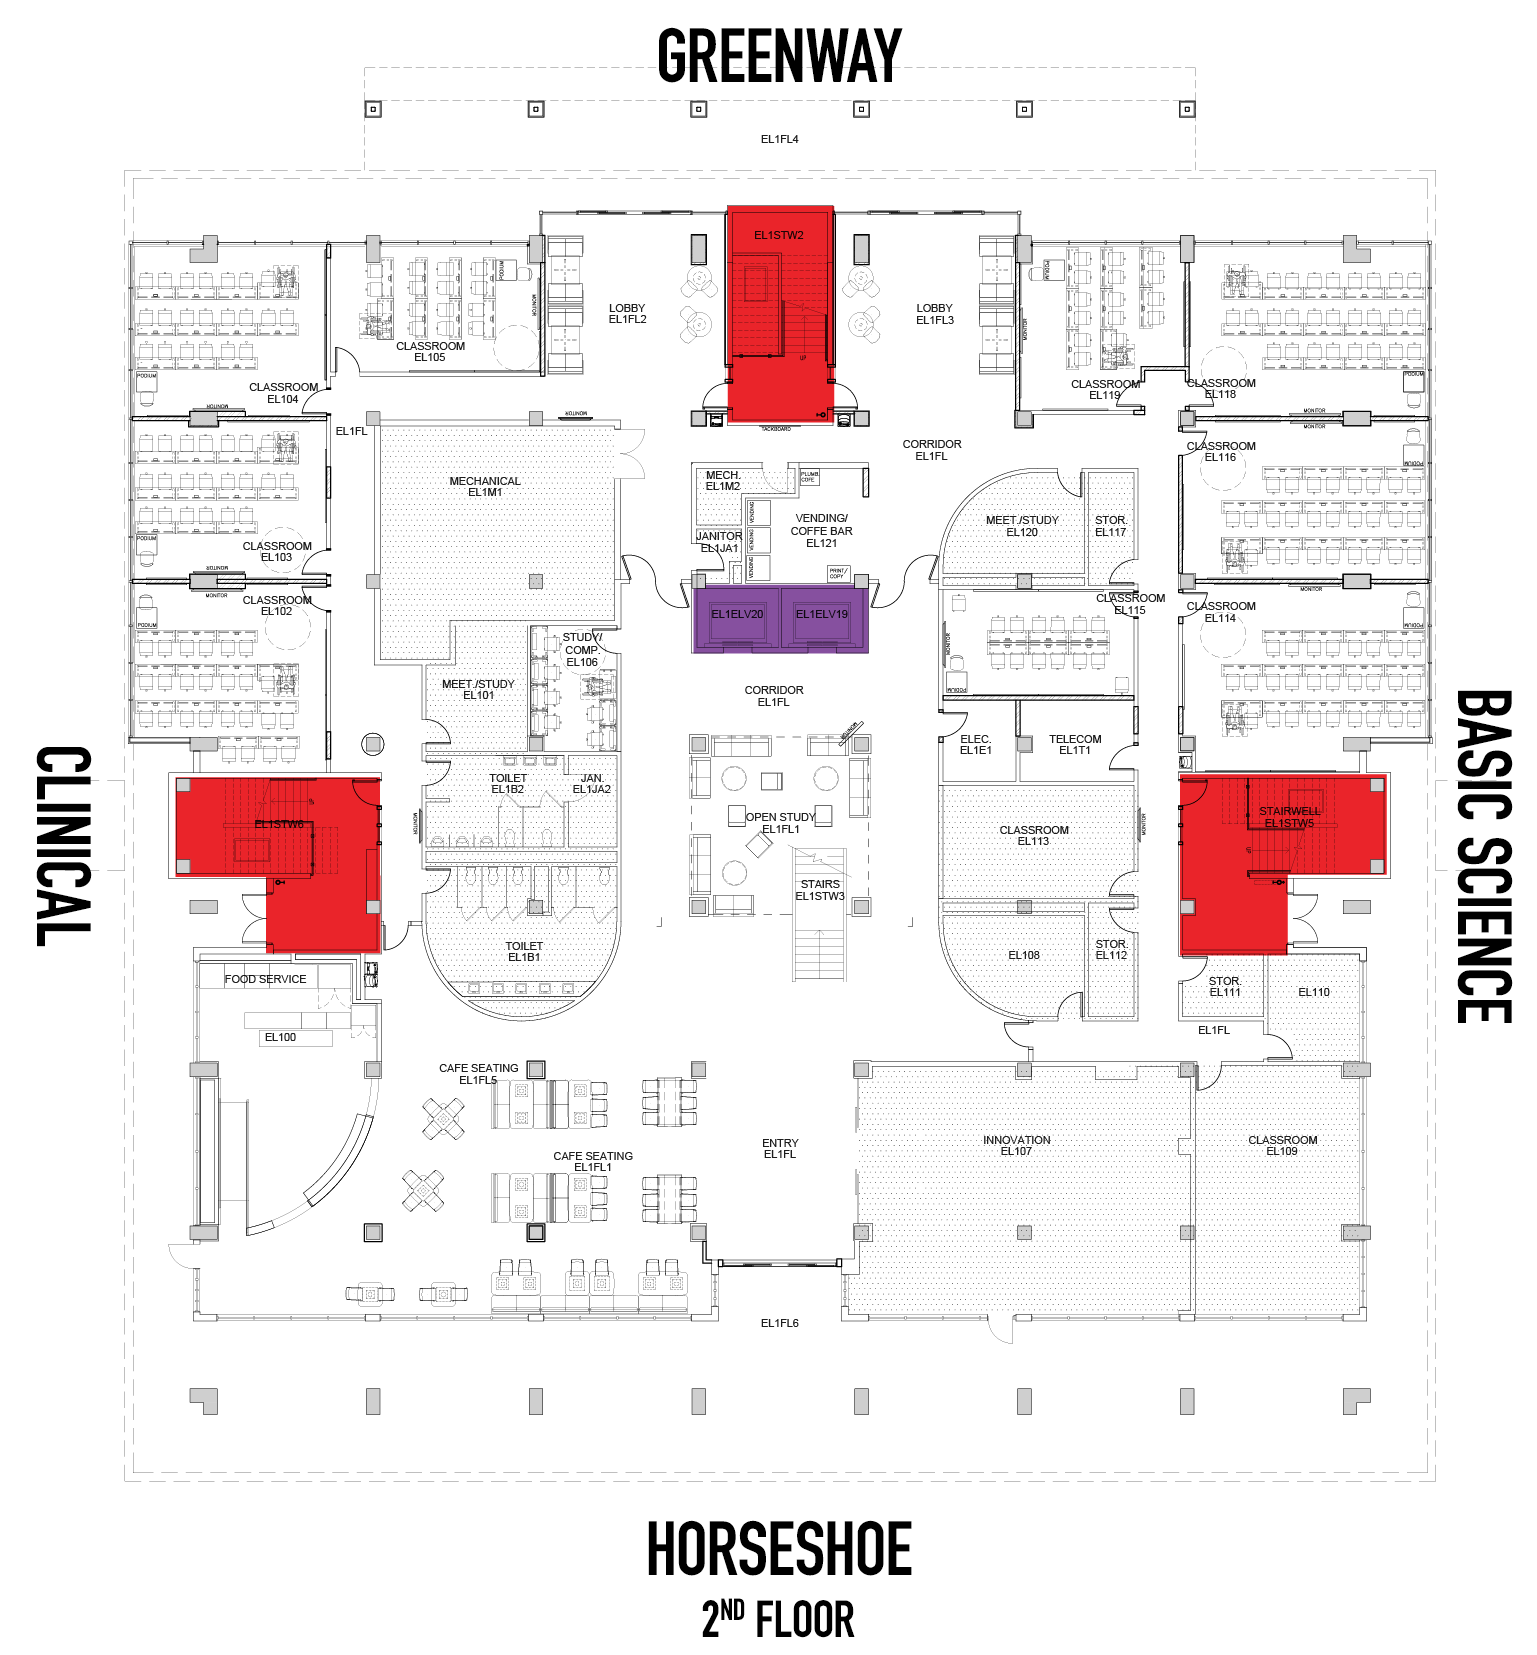 Library 2nd floor plan